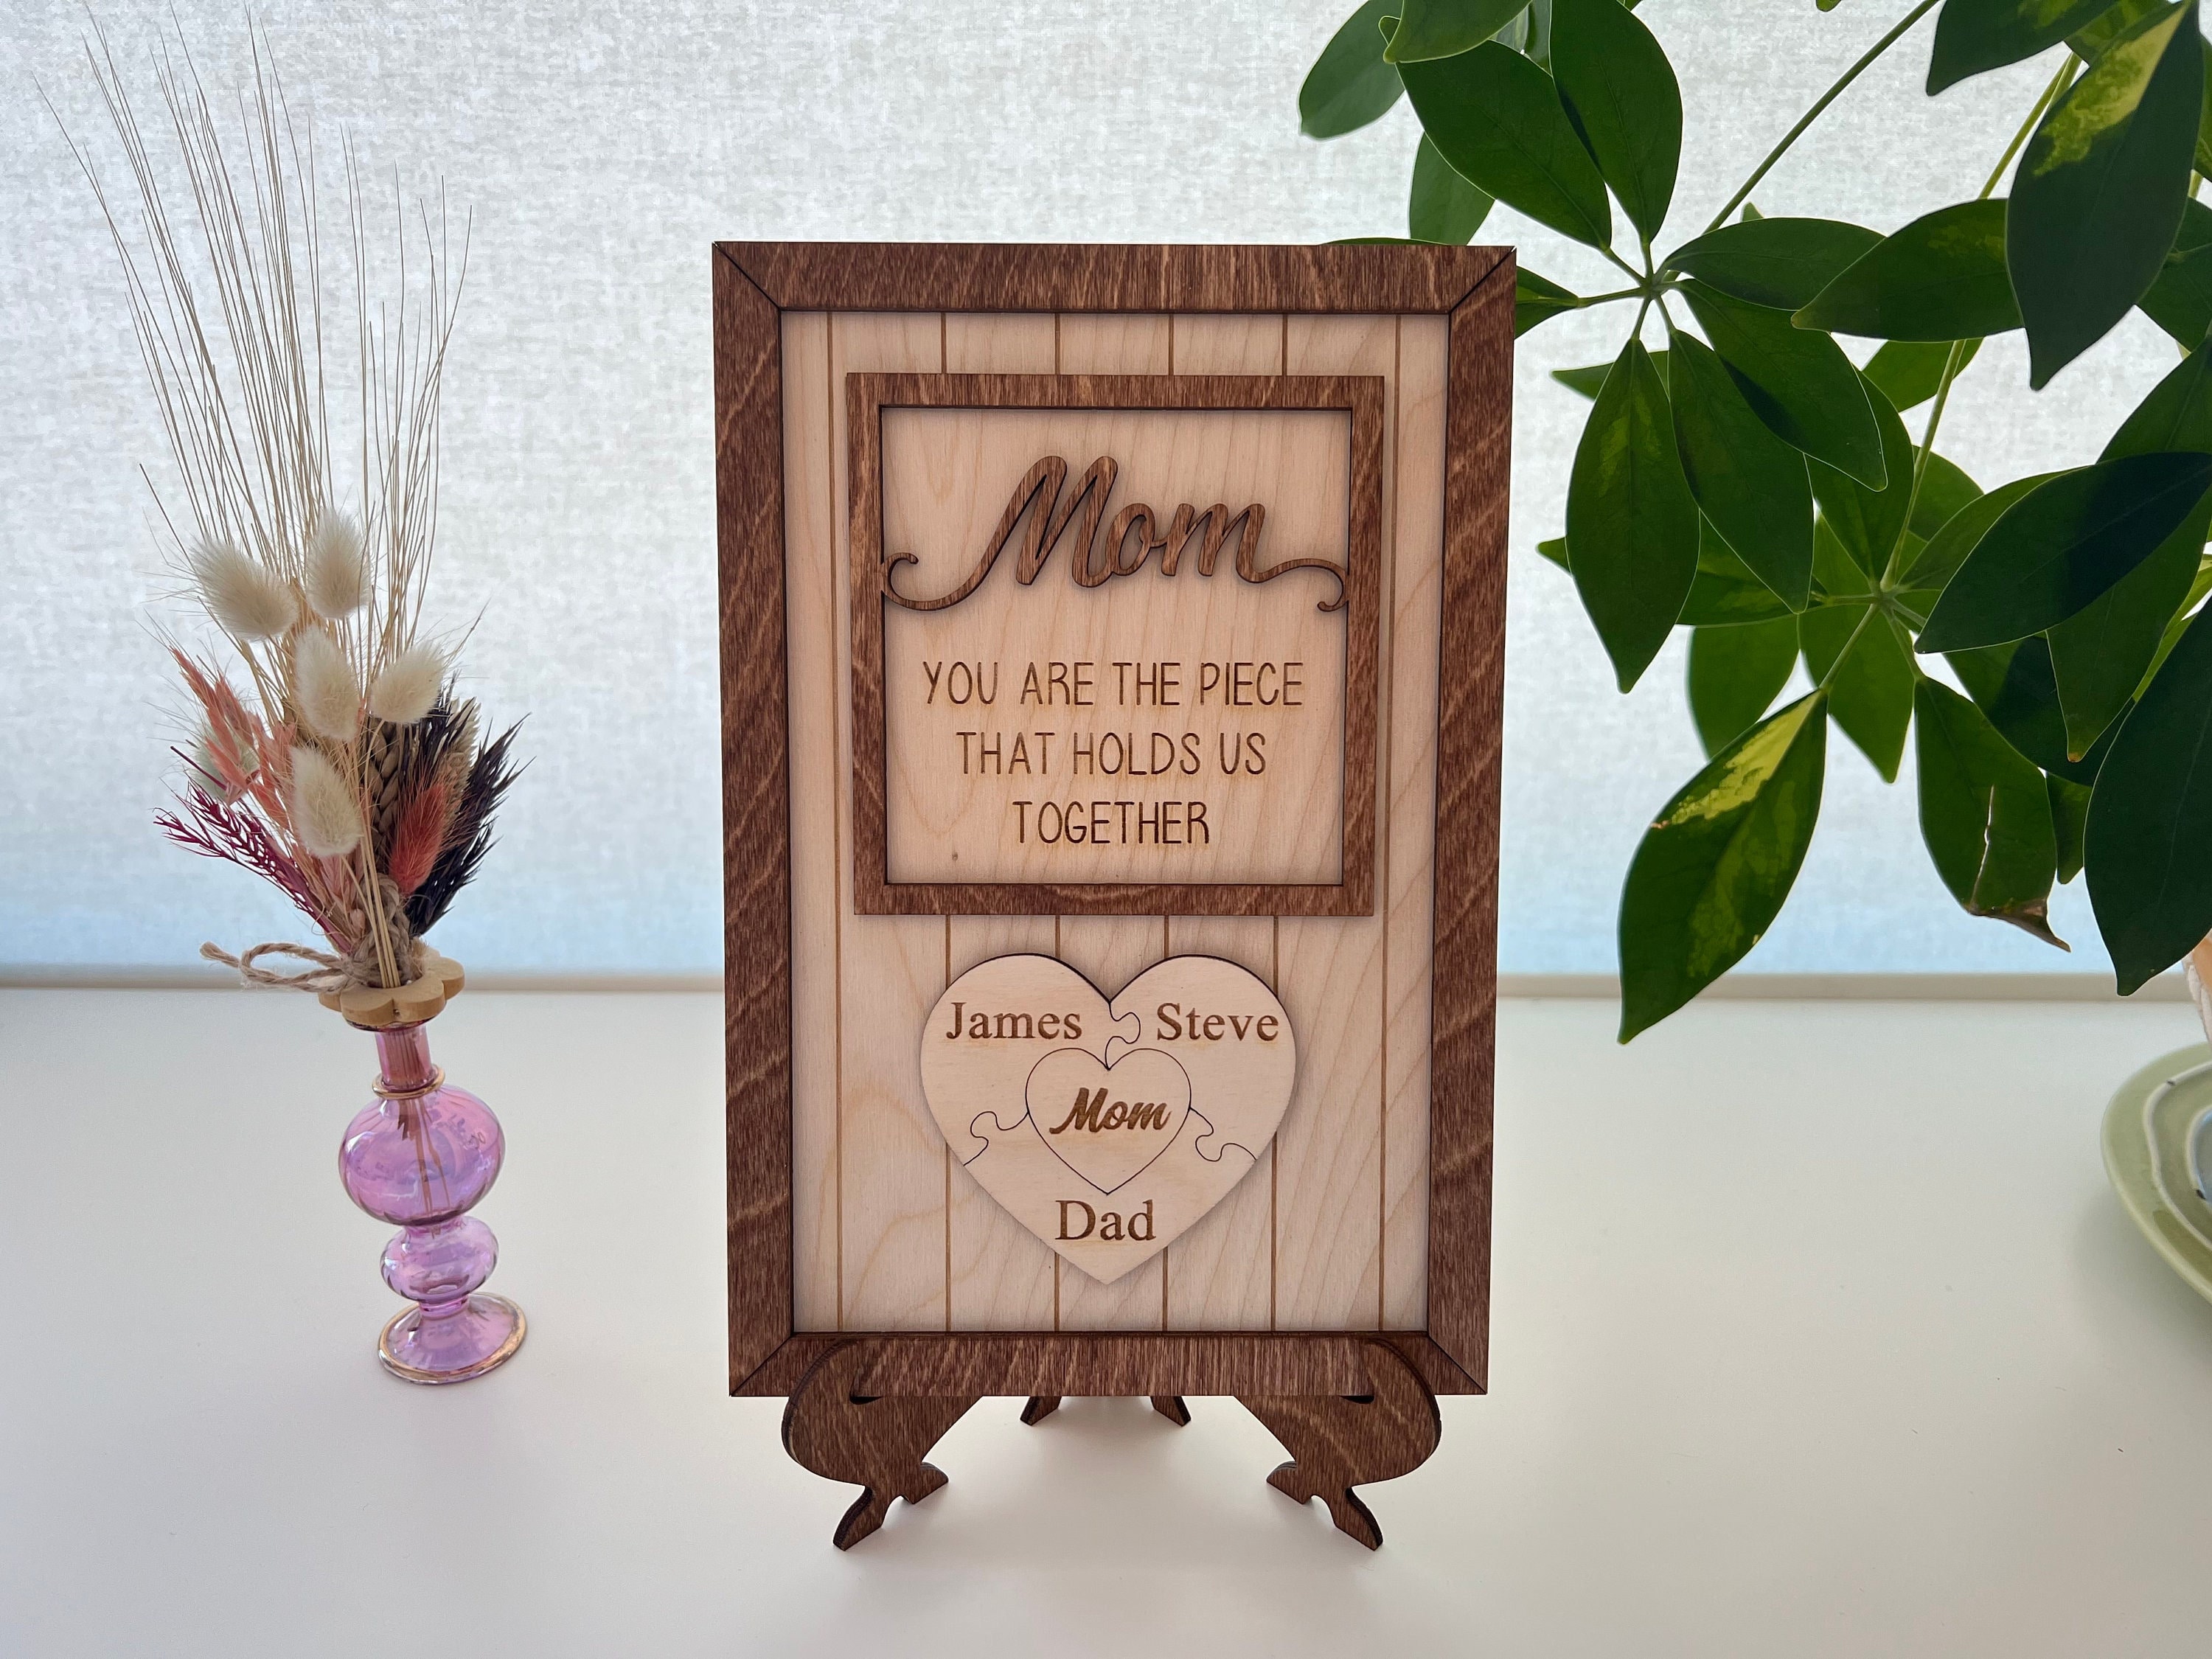 Gifts for Mom from Daughter, Son - Christmas Gifts for Mom, Mom Christmas  Gifts, Birthday Gifts for …See more Gifts for Mom from Daughter, Son 